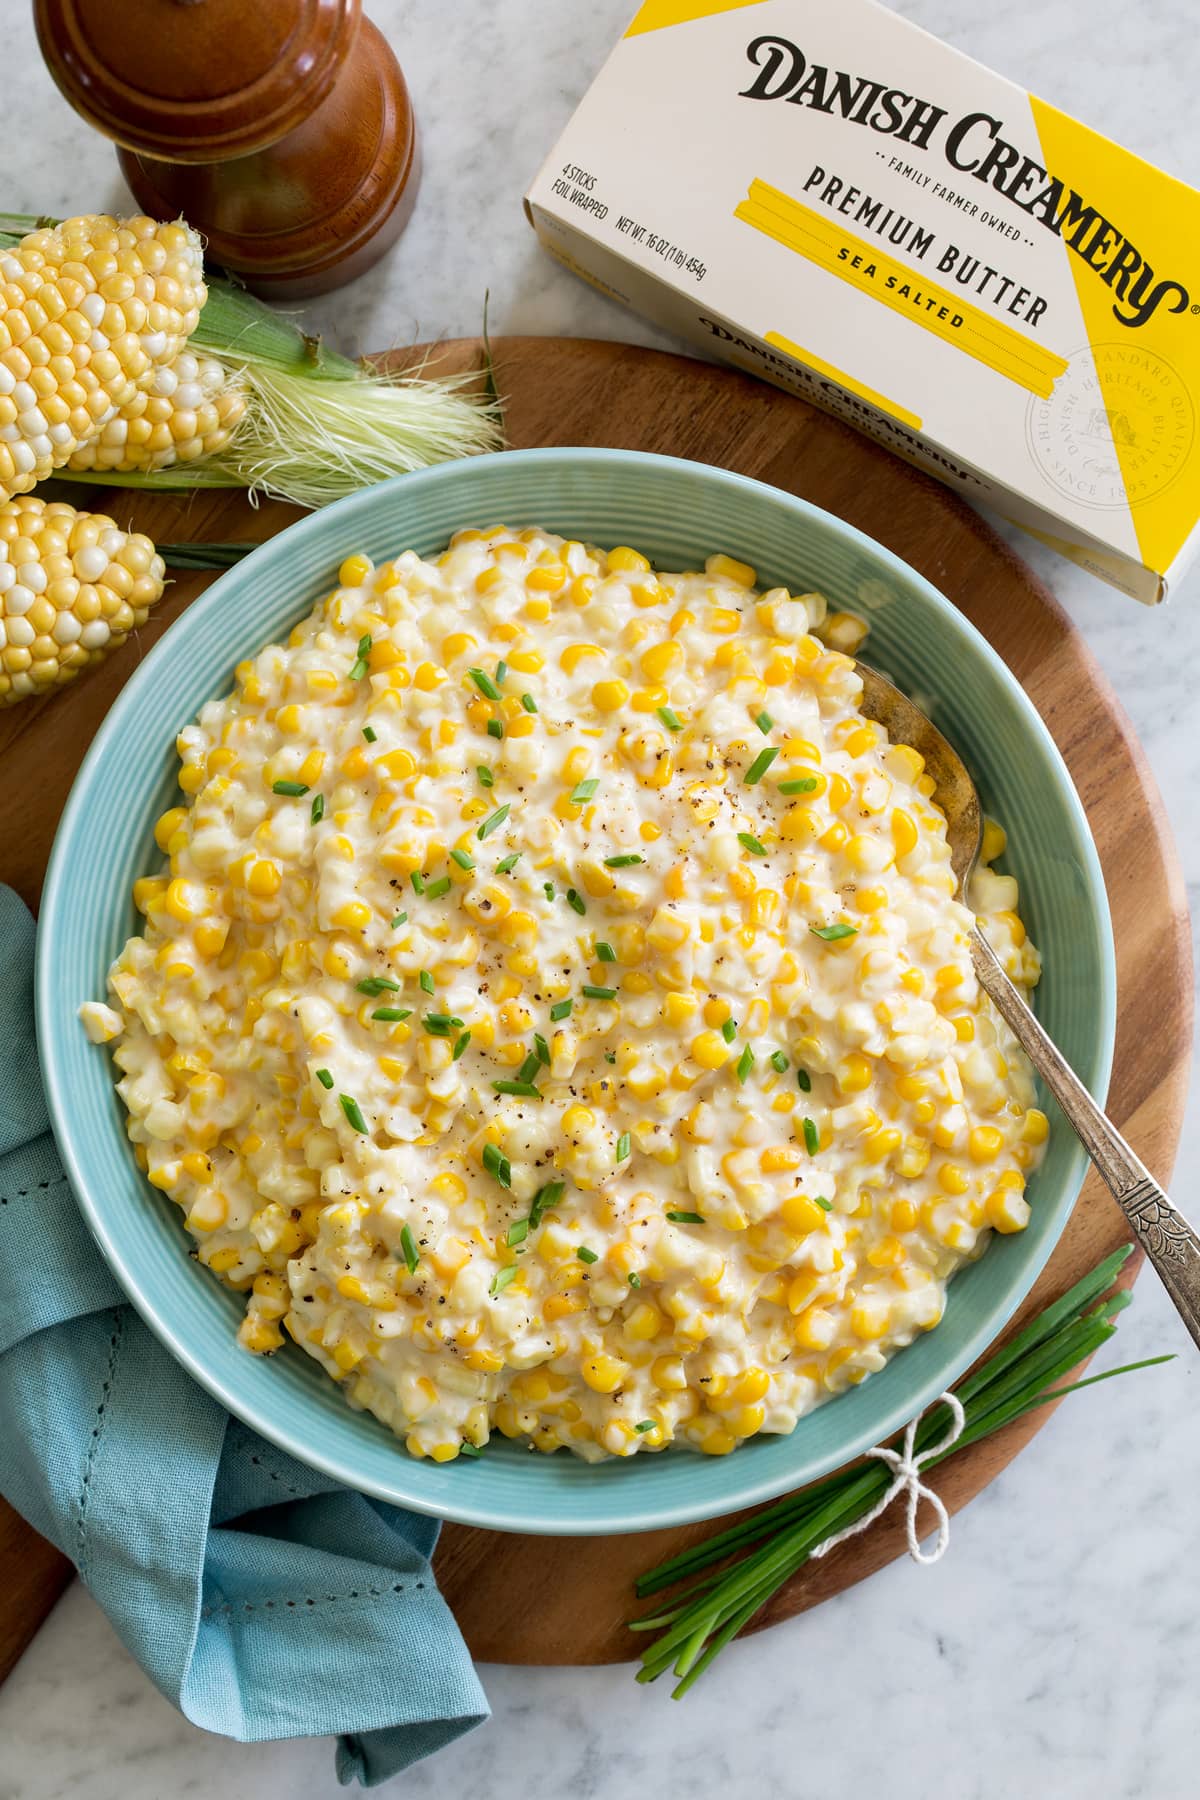 Creamed corn made with cream and butter.